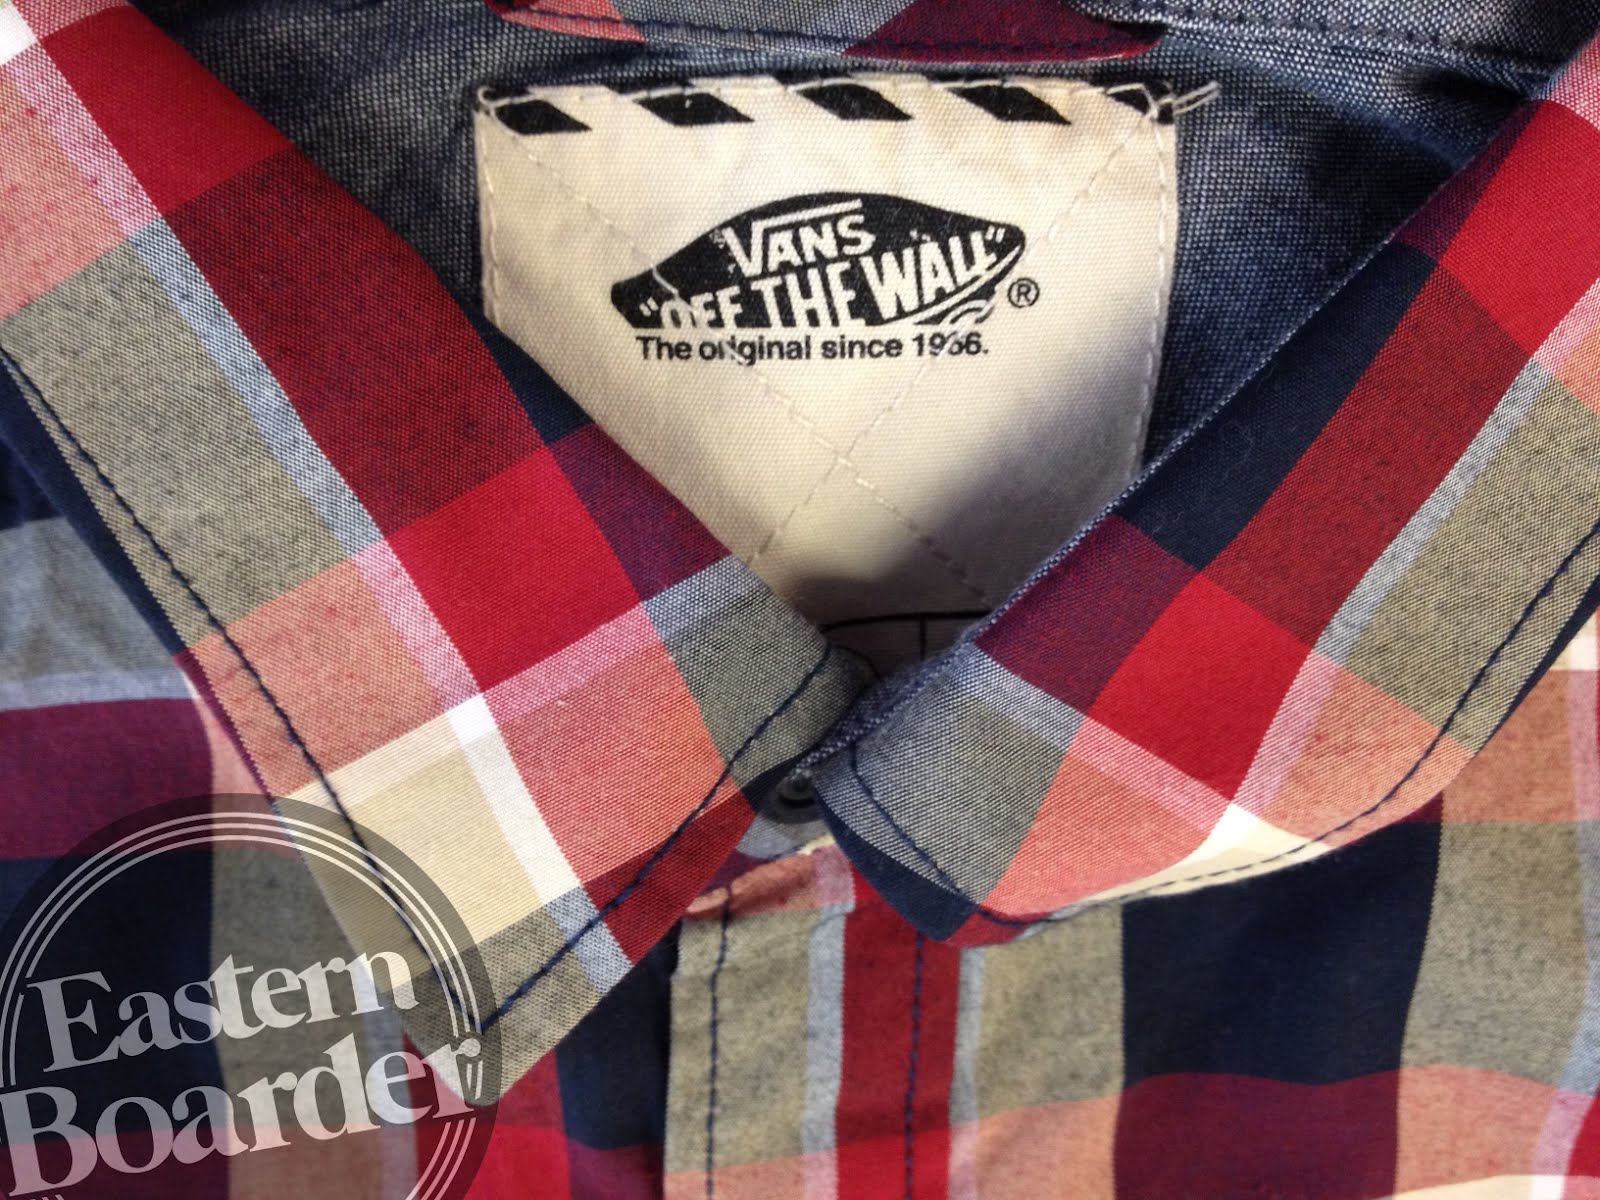 EASTERN BOARDER WORCESTER: NEW PRODUCT: VANS APPAREL, THRASHER, AND MORE!!!